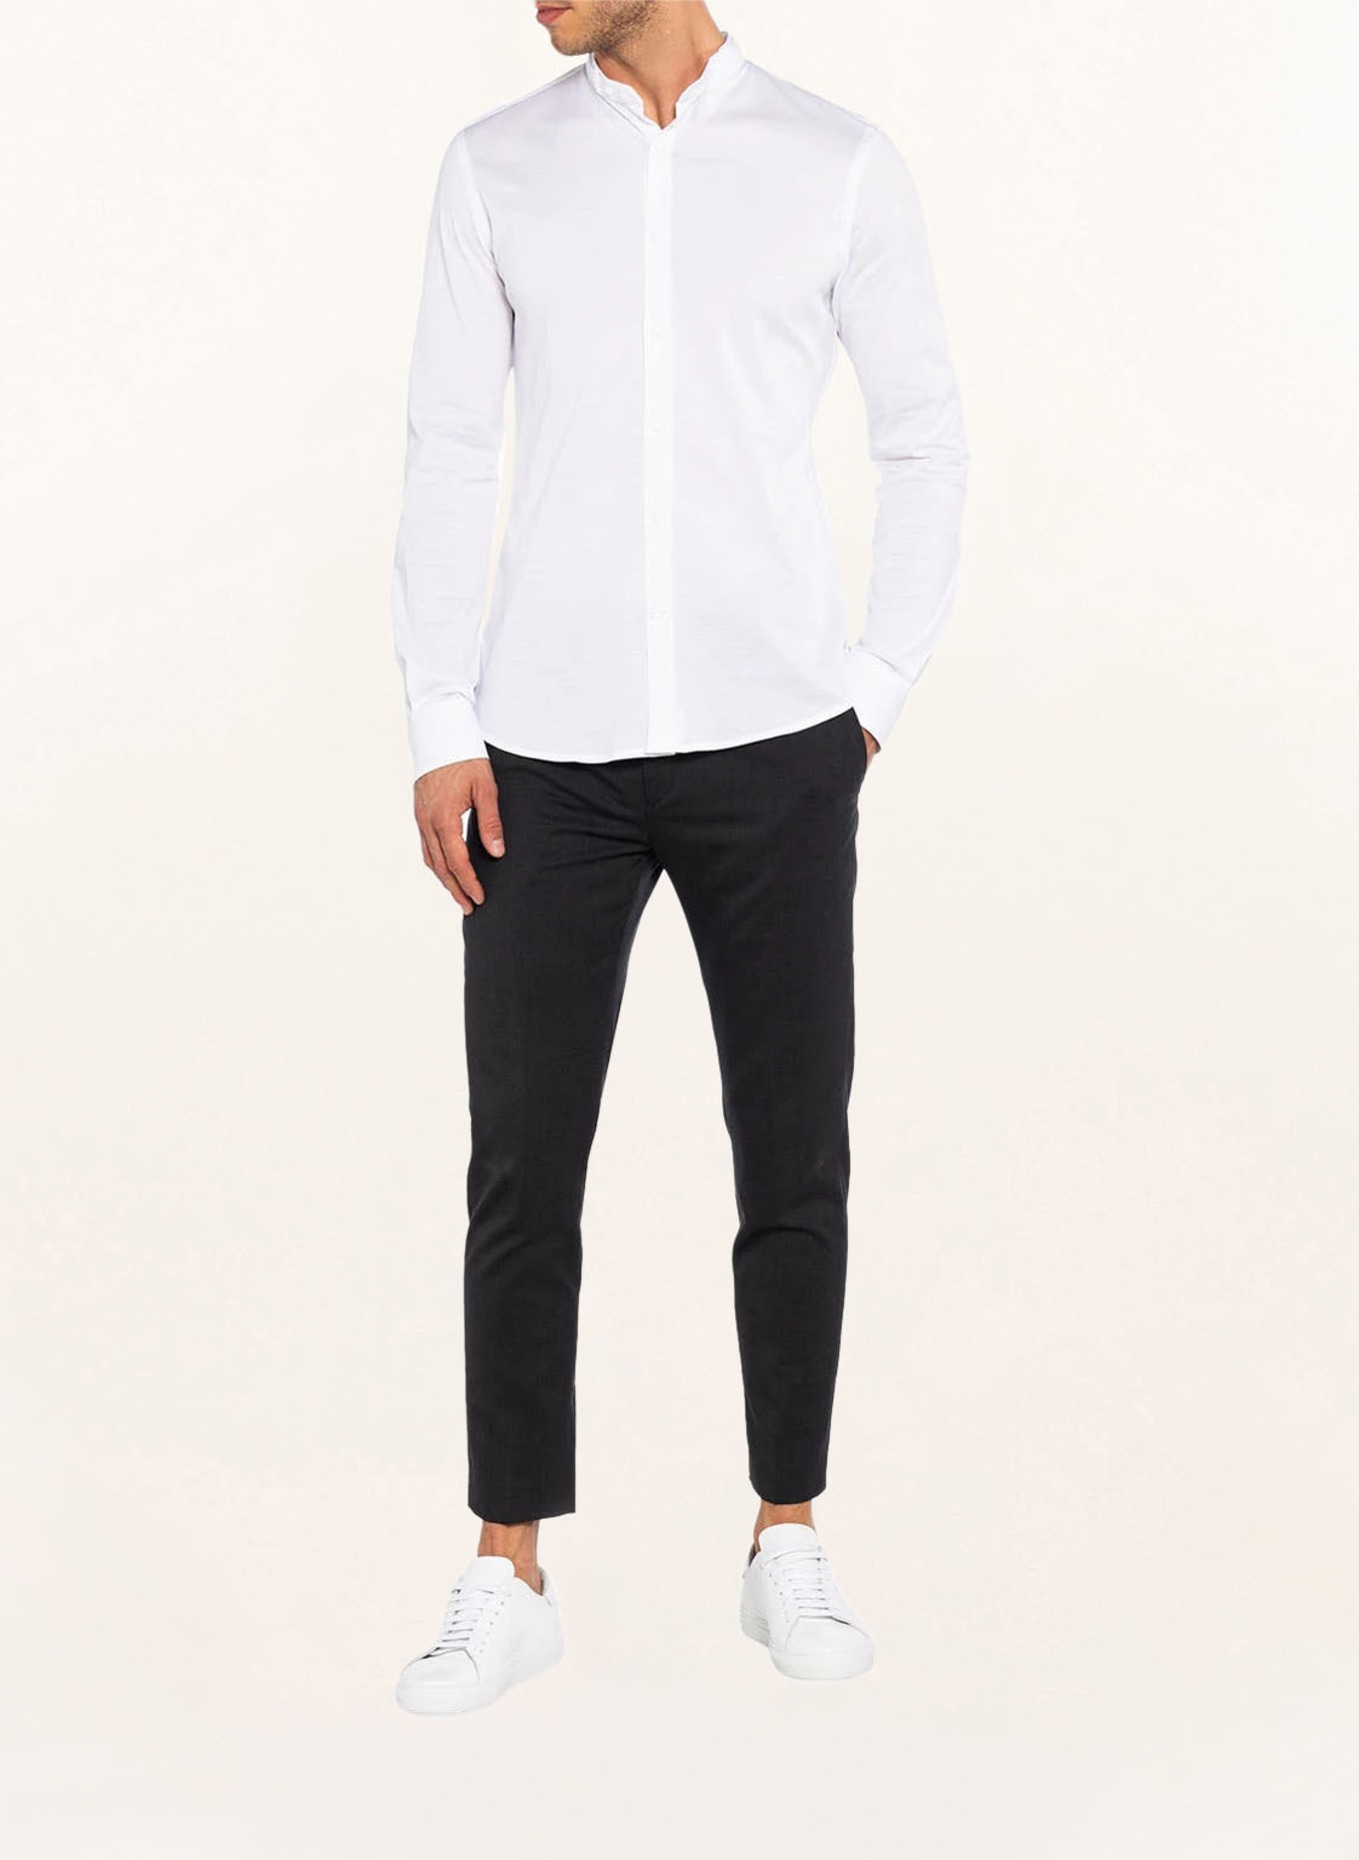 Gottseidank Trachten shirt LENZ extra slim fit with stand-up collar, Color: WHITE (Image 2)